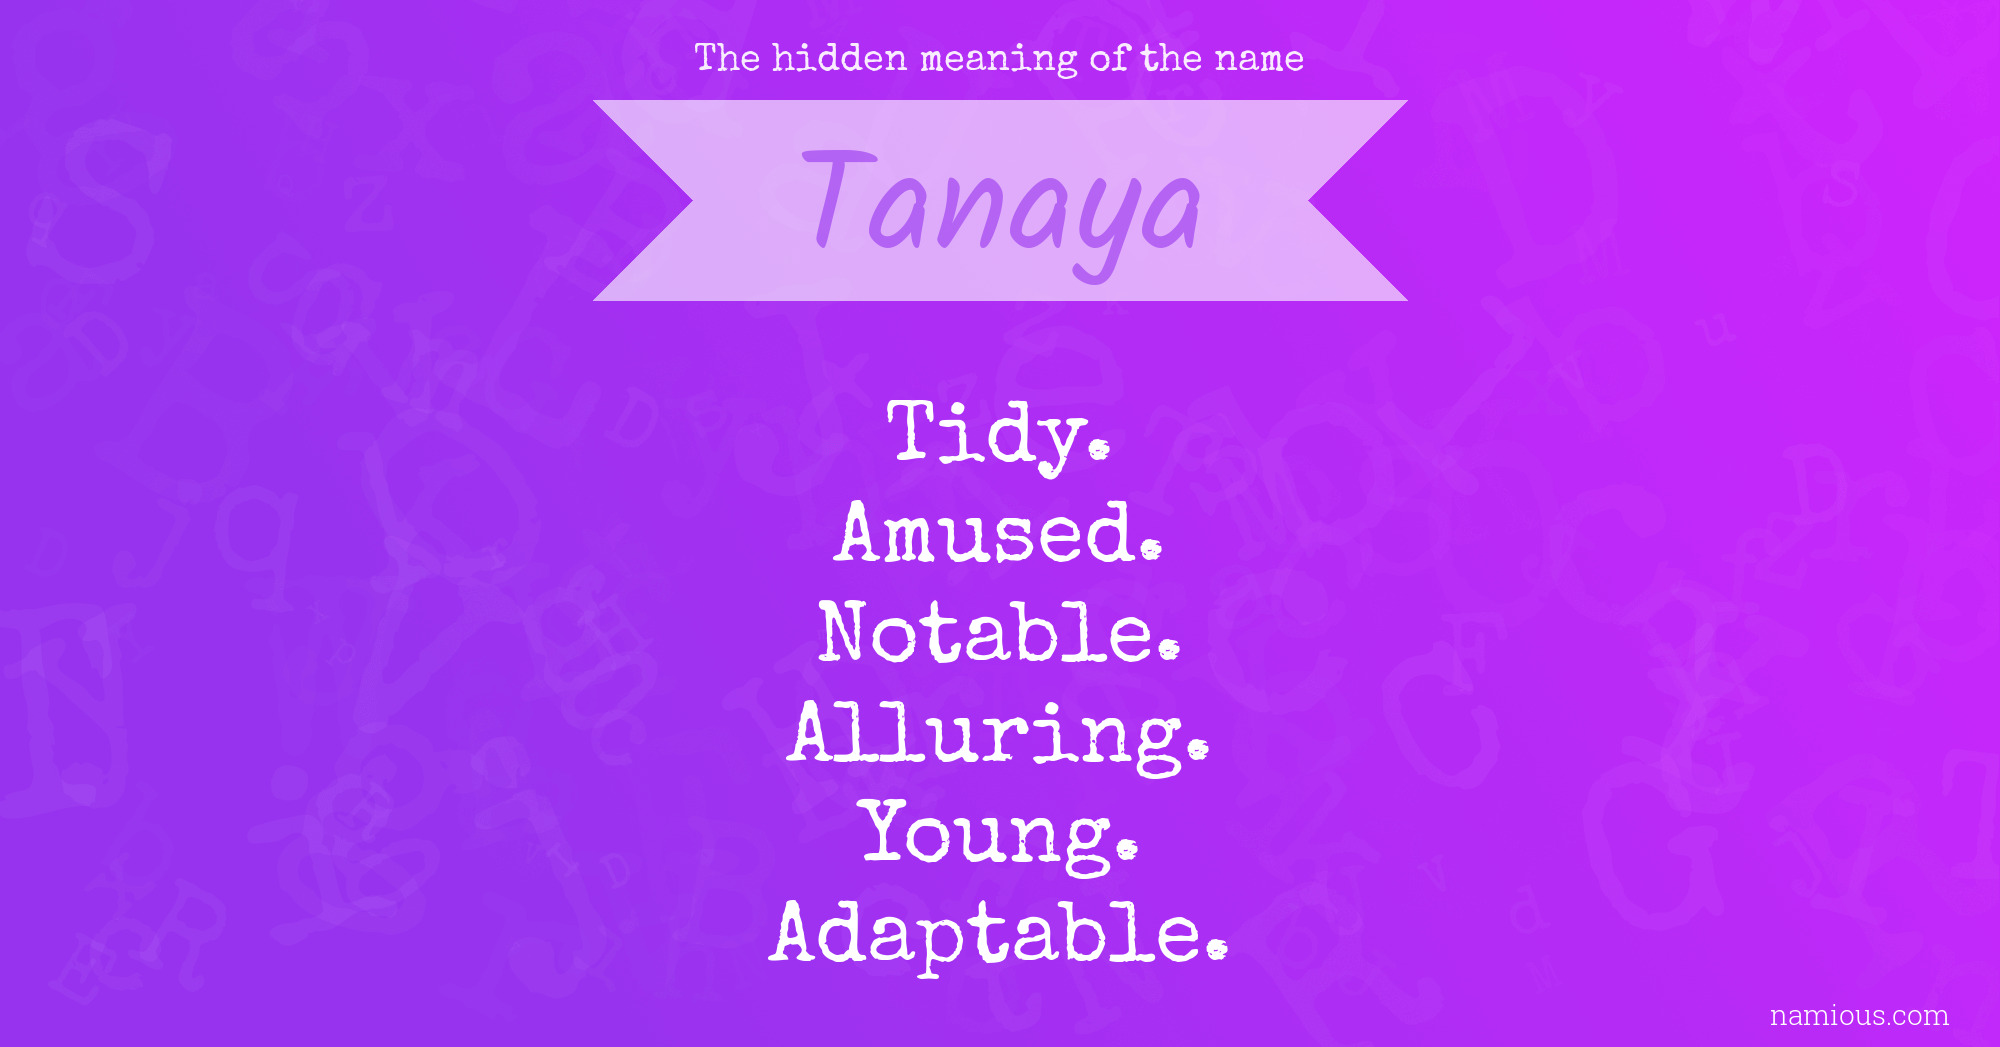 The hidden meaning of the name Tanaya